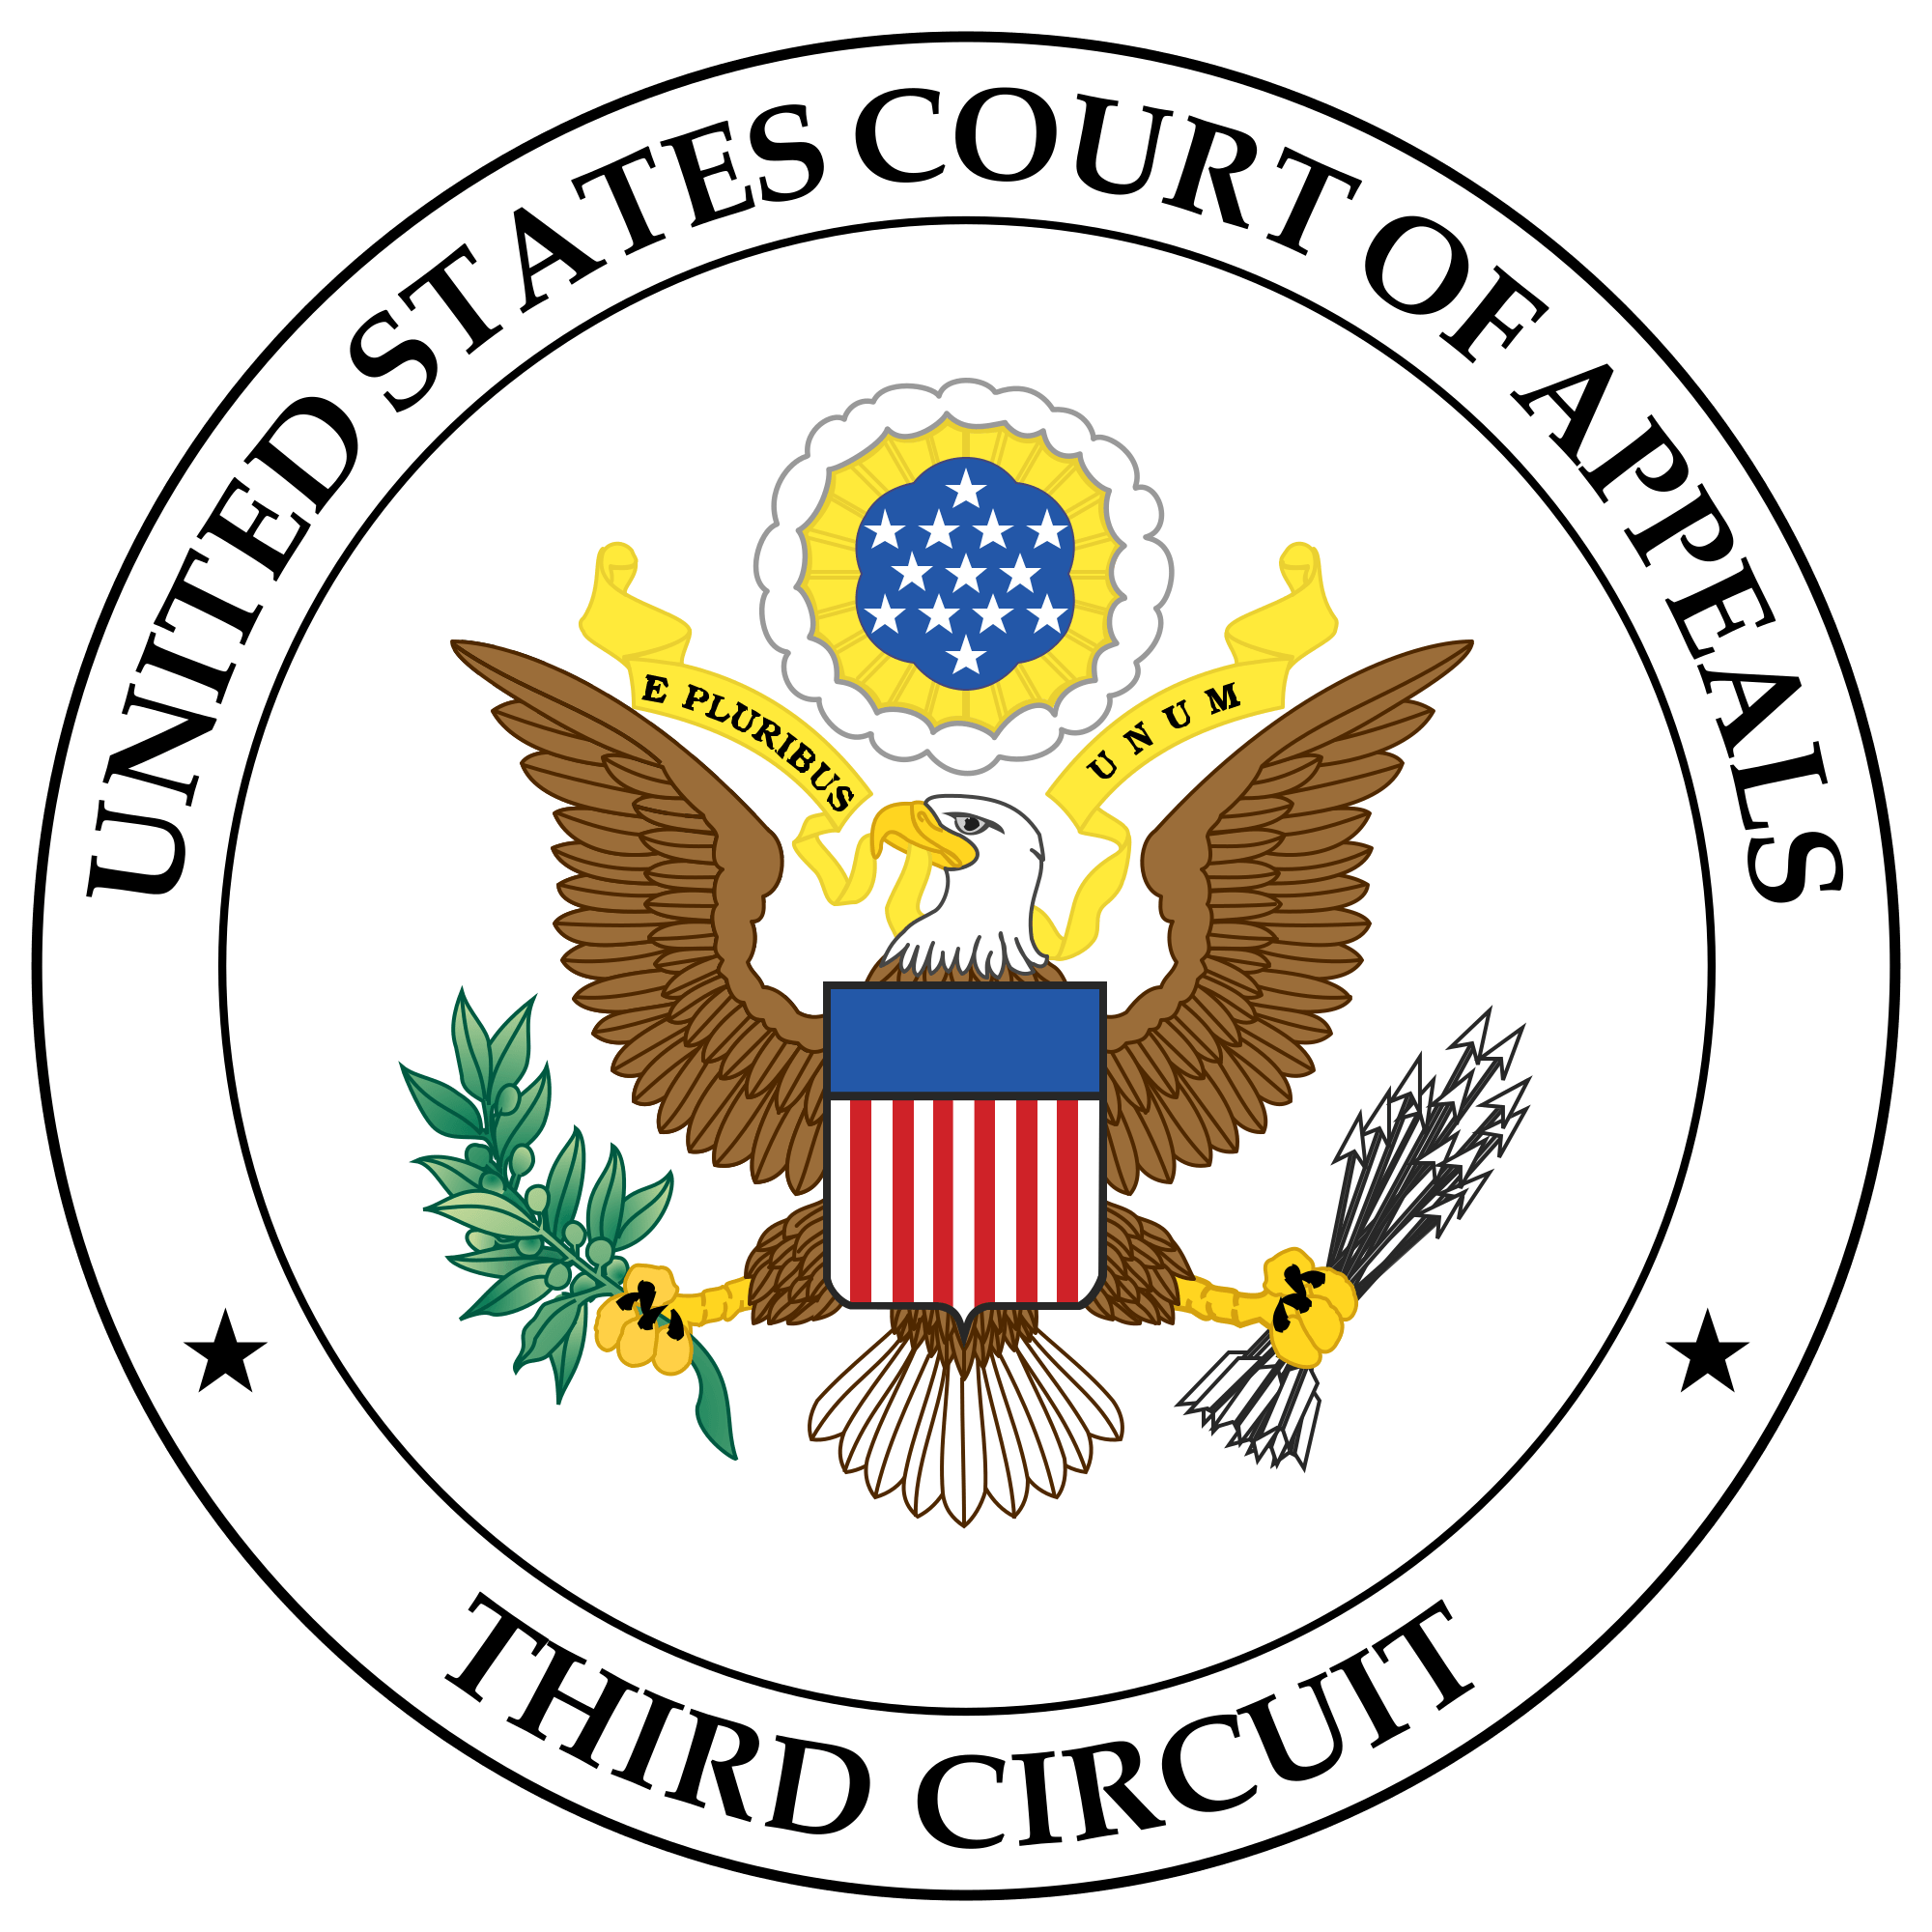 United States District Court Logo - Seal of the United States Court of Appeals for the Third